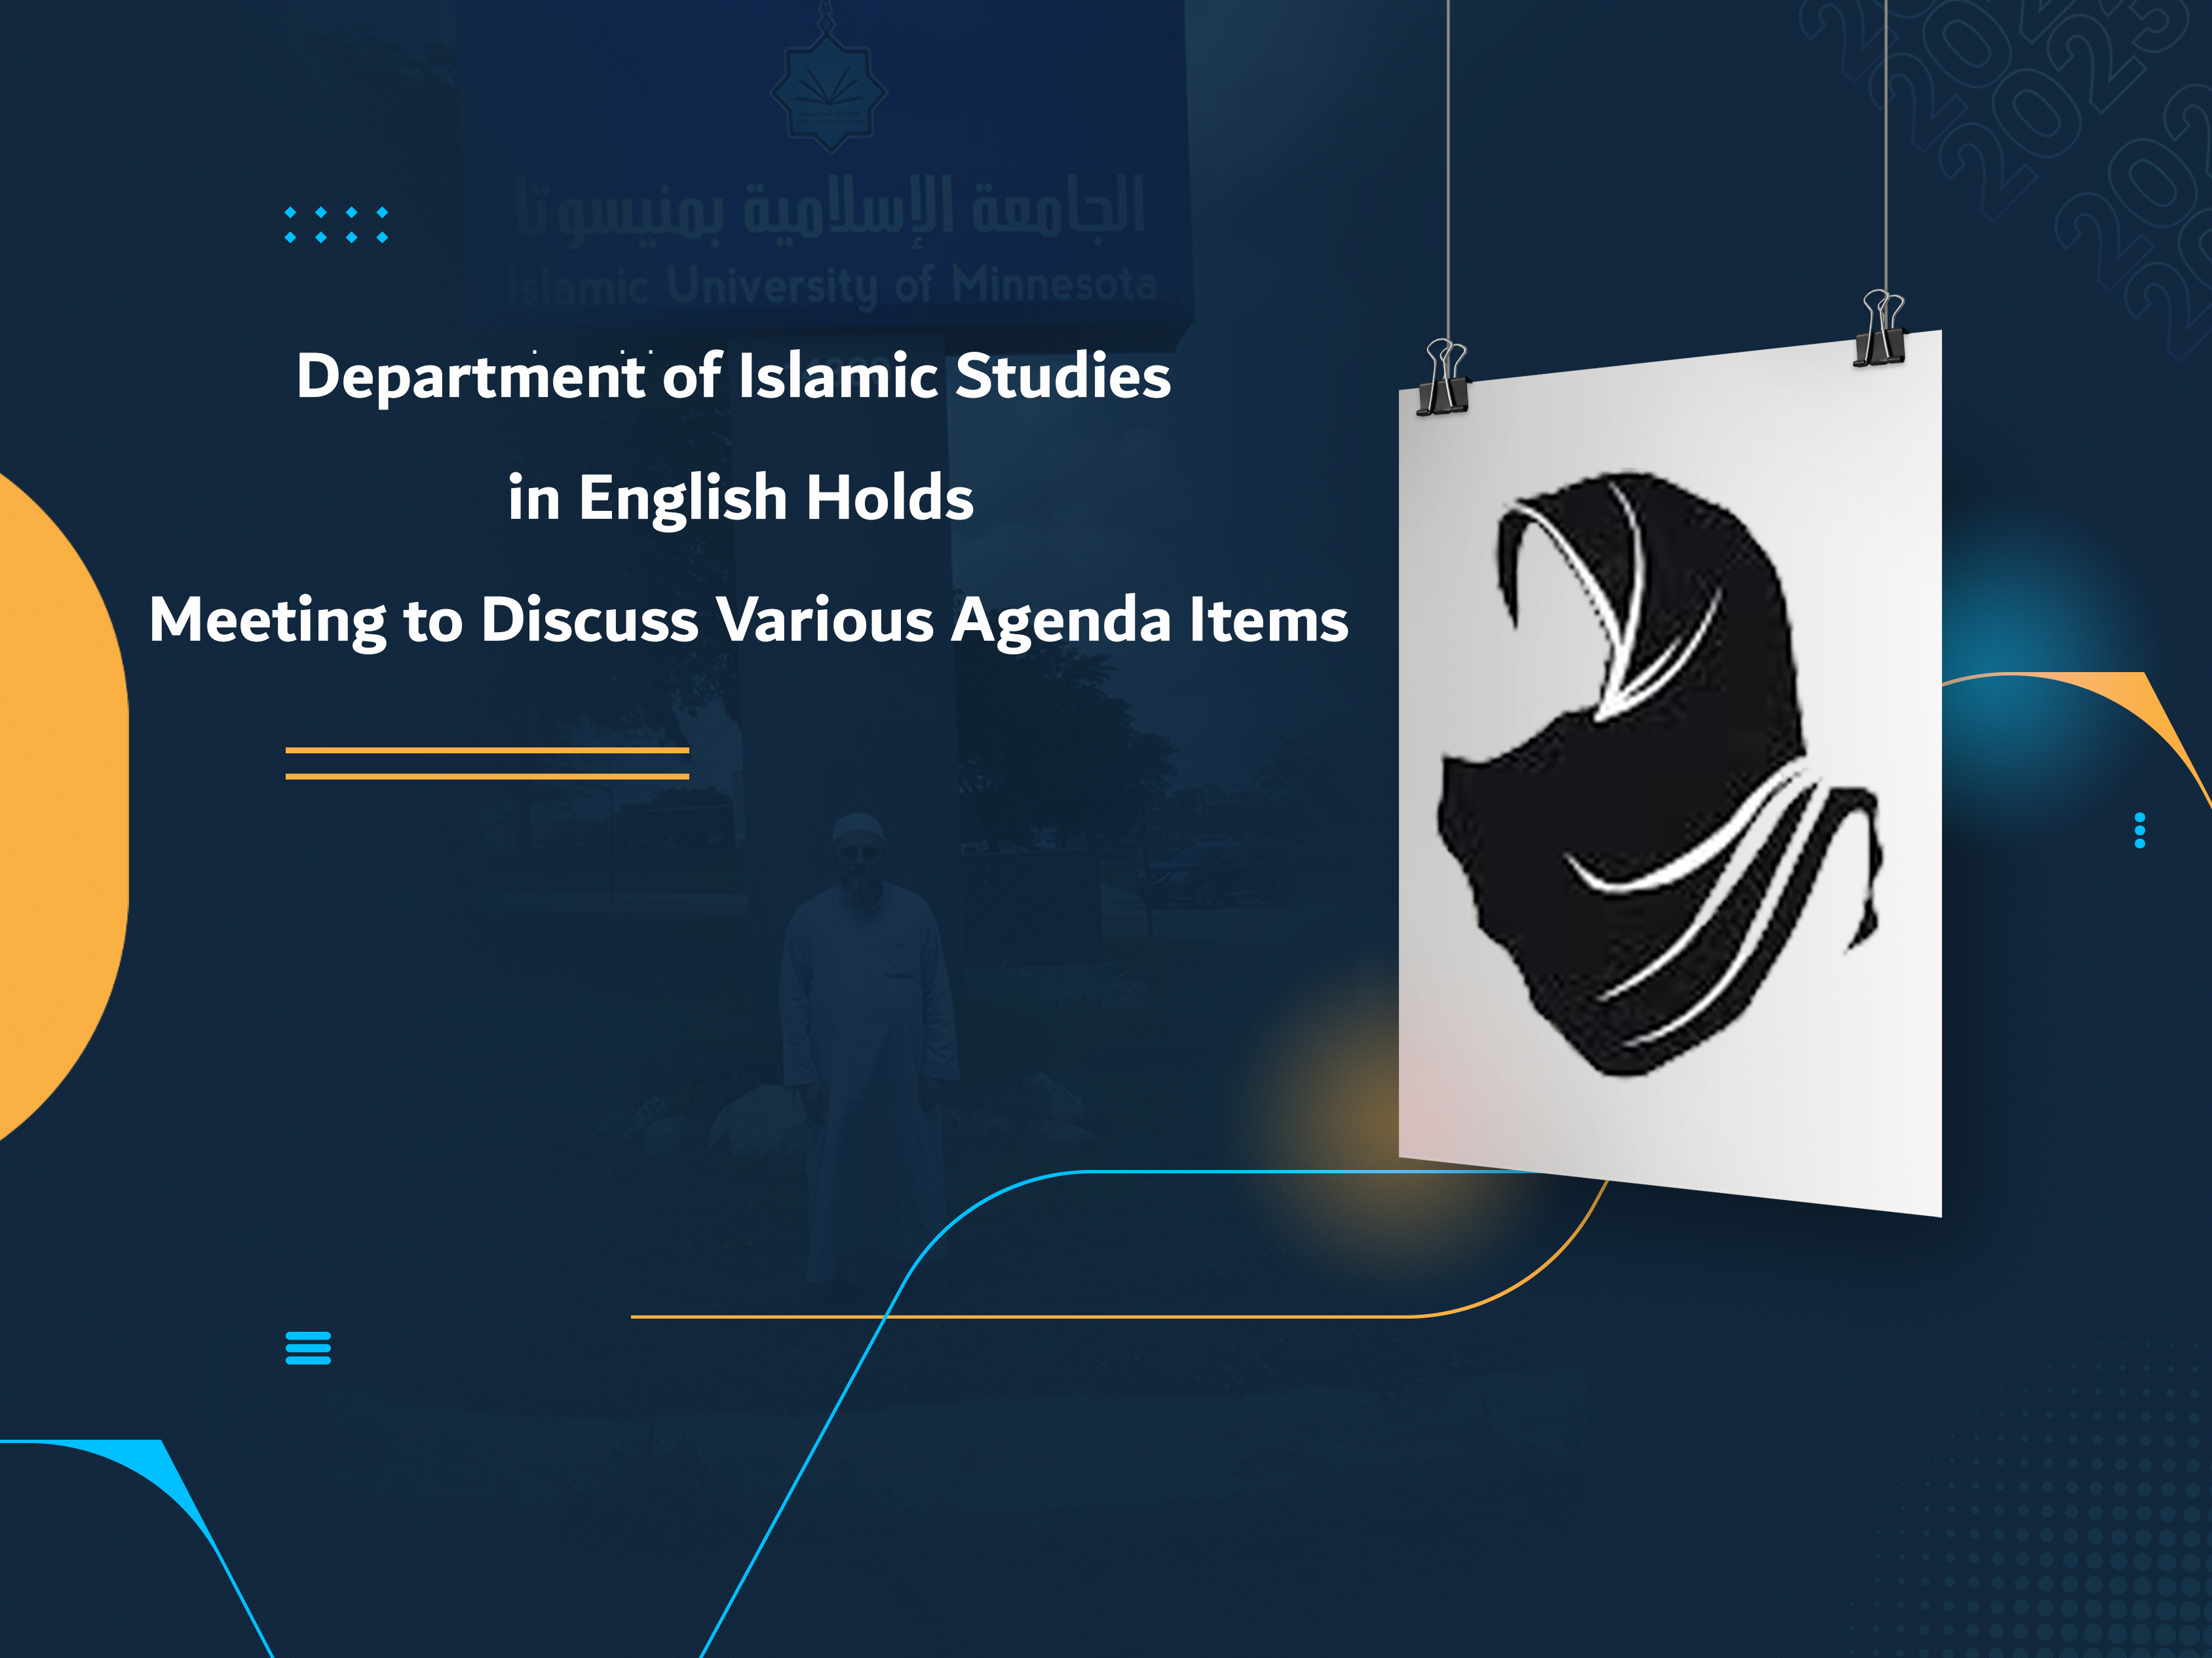 Department of Islamic Studies in English Holds Meeting to Discuss Various Agenda Items